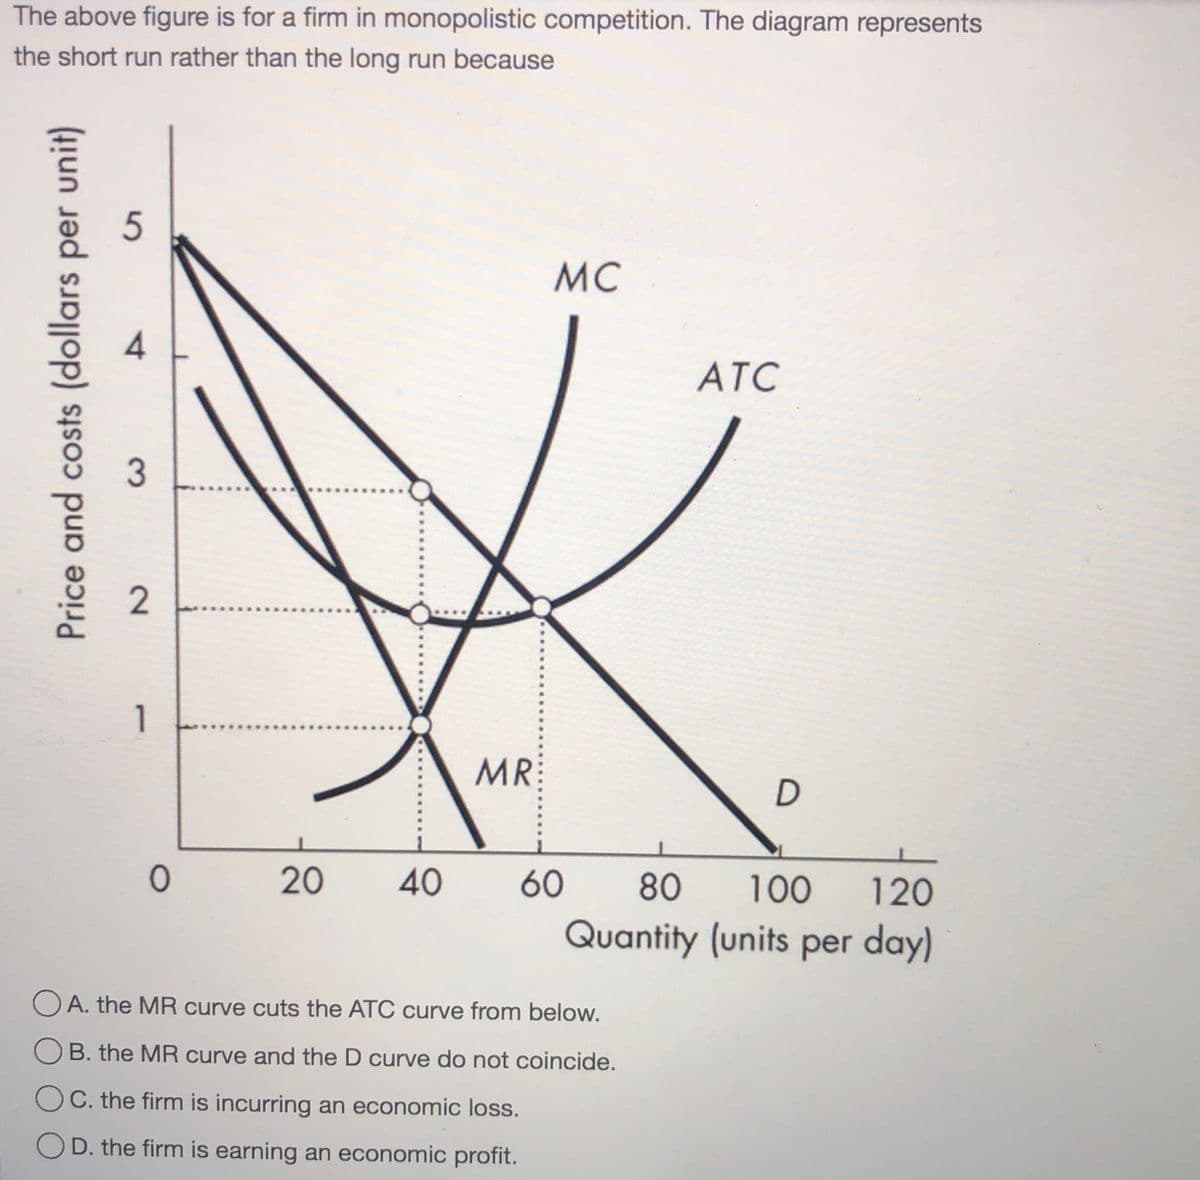 The above figure is for a firm in monopolistic competition. The diagram represents
the short run rather than the long run because
5
MC
4
АТС
1
MR
20
40
60
80
100
120
Quantity (units per day)
A. the MR curve cuts the ATC curve from below.
O B. the MR curve and the D curve do not coincide.
OC. the firm is incurring an economic loss.
OD. the firm is earning an economic profit.
3.
2.
Price and costs (dollars per unit)
